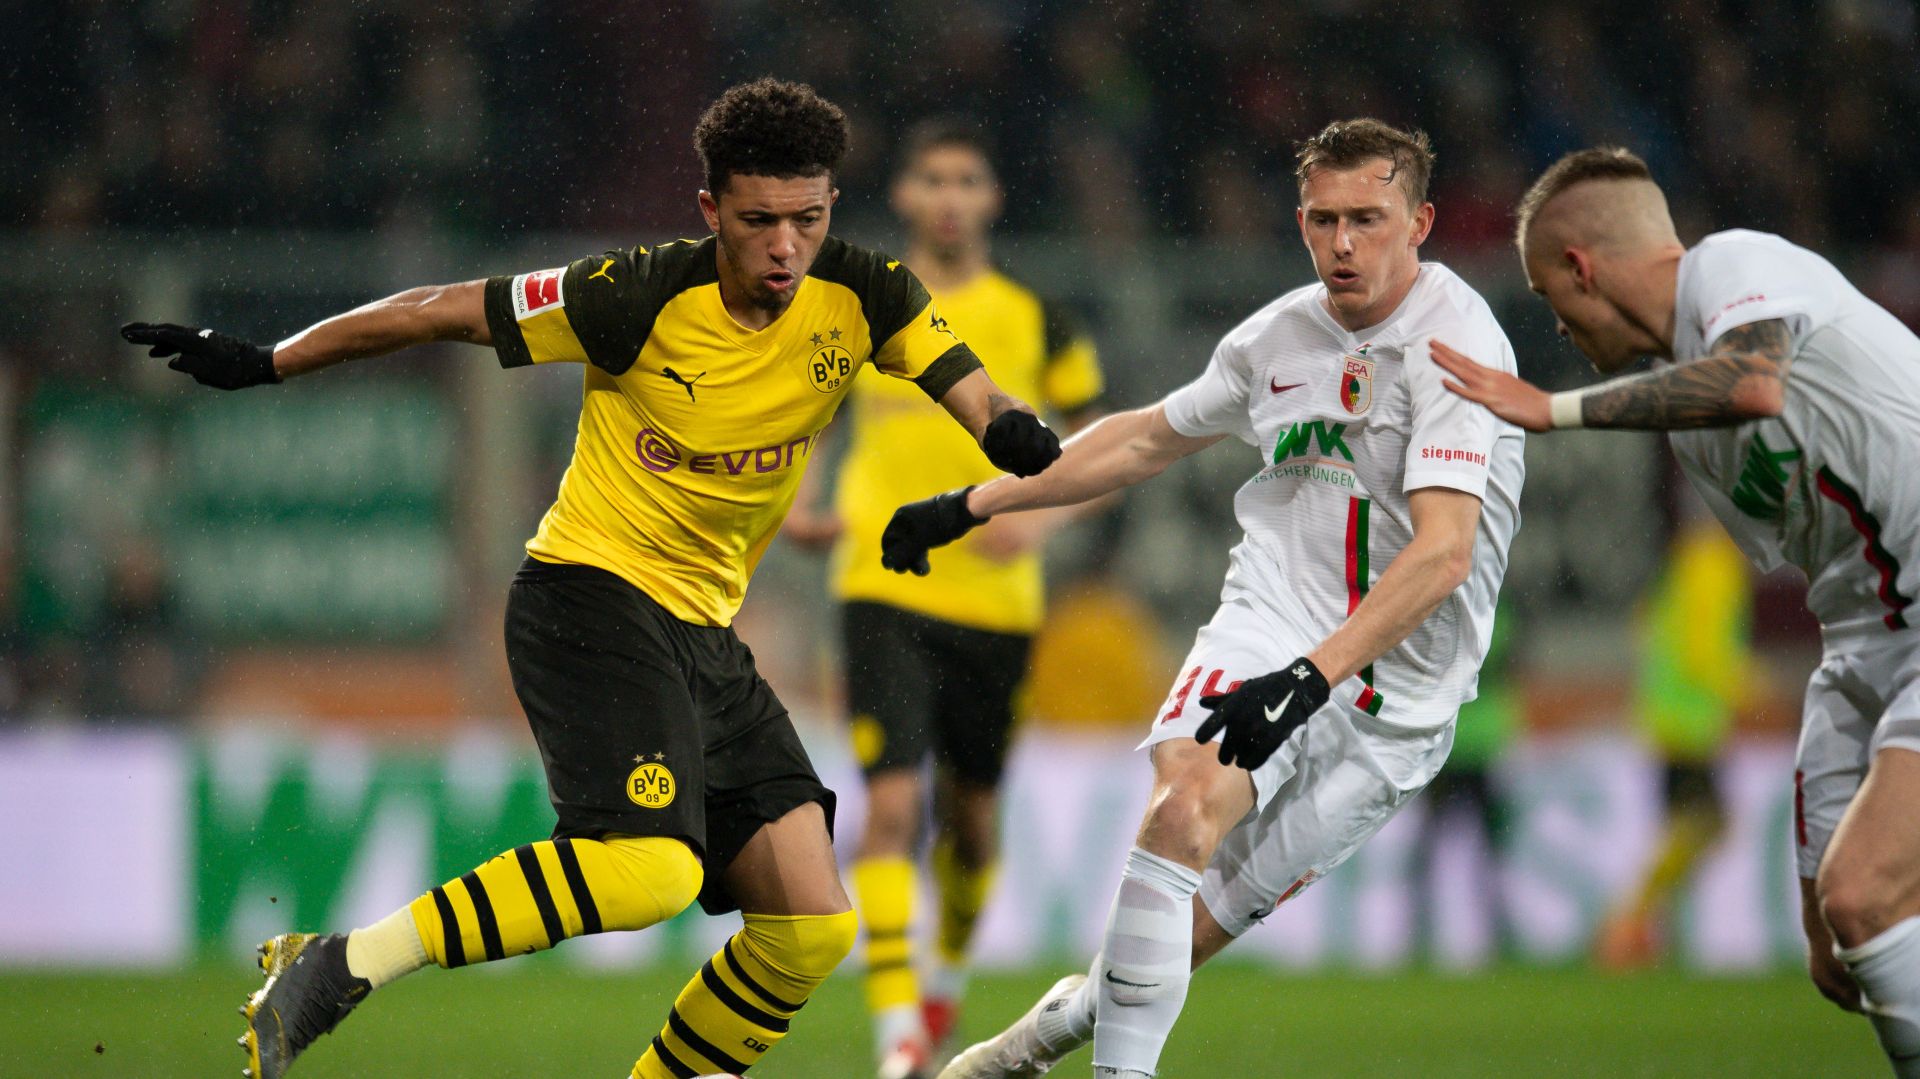 epa07407403 Jadon Sancho of Dortmund (L) in action with Georg Teigl of Augsburg during the German Bundesliga soccer match between FC Augsburg and Borussia Dortmund in Augsburg, Germany, 01 March 2019.  EPA/DANIEL KOPATSCH CONDITIONS - ATTENTION: The DFL regulations prohibit any use of photographs as image sequences and/or quasi-video.